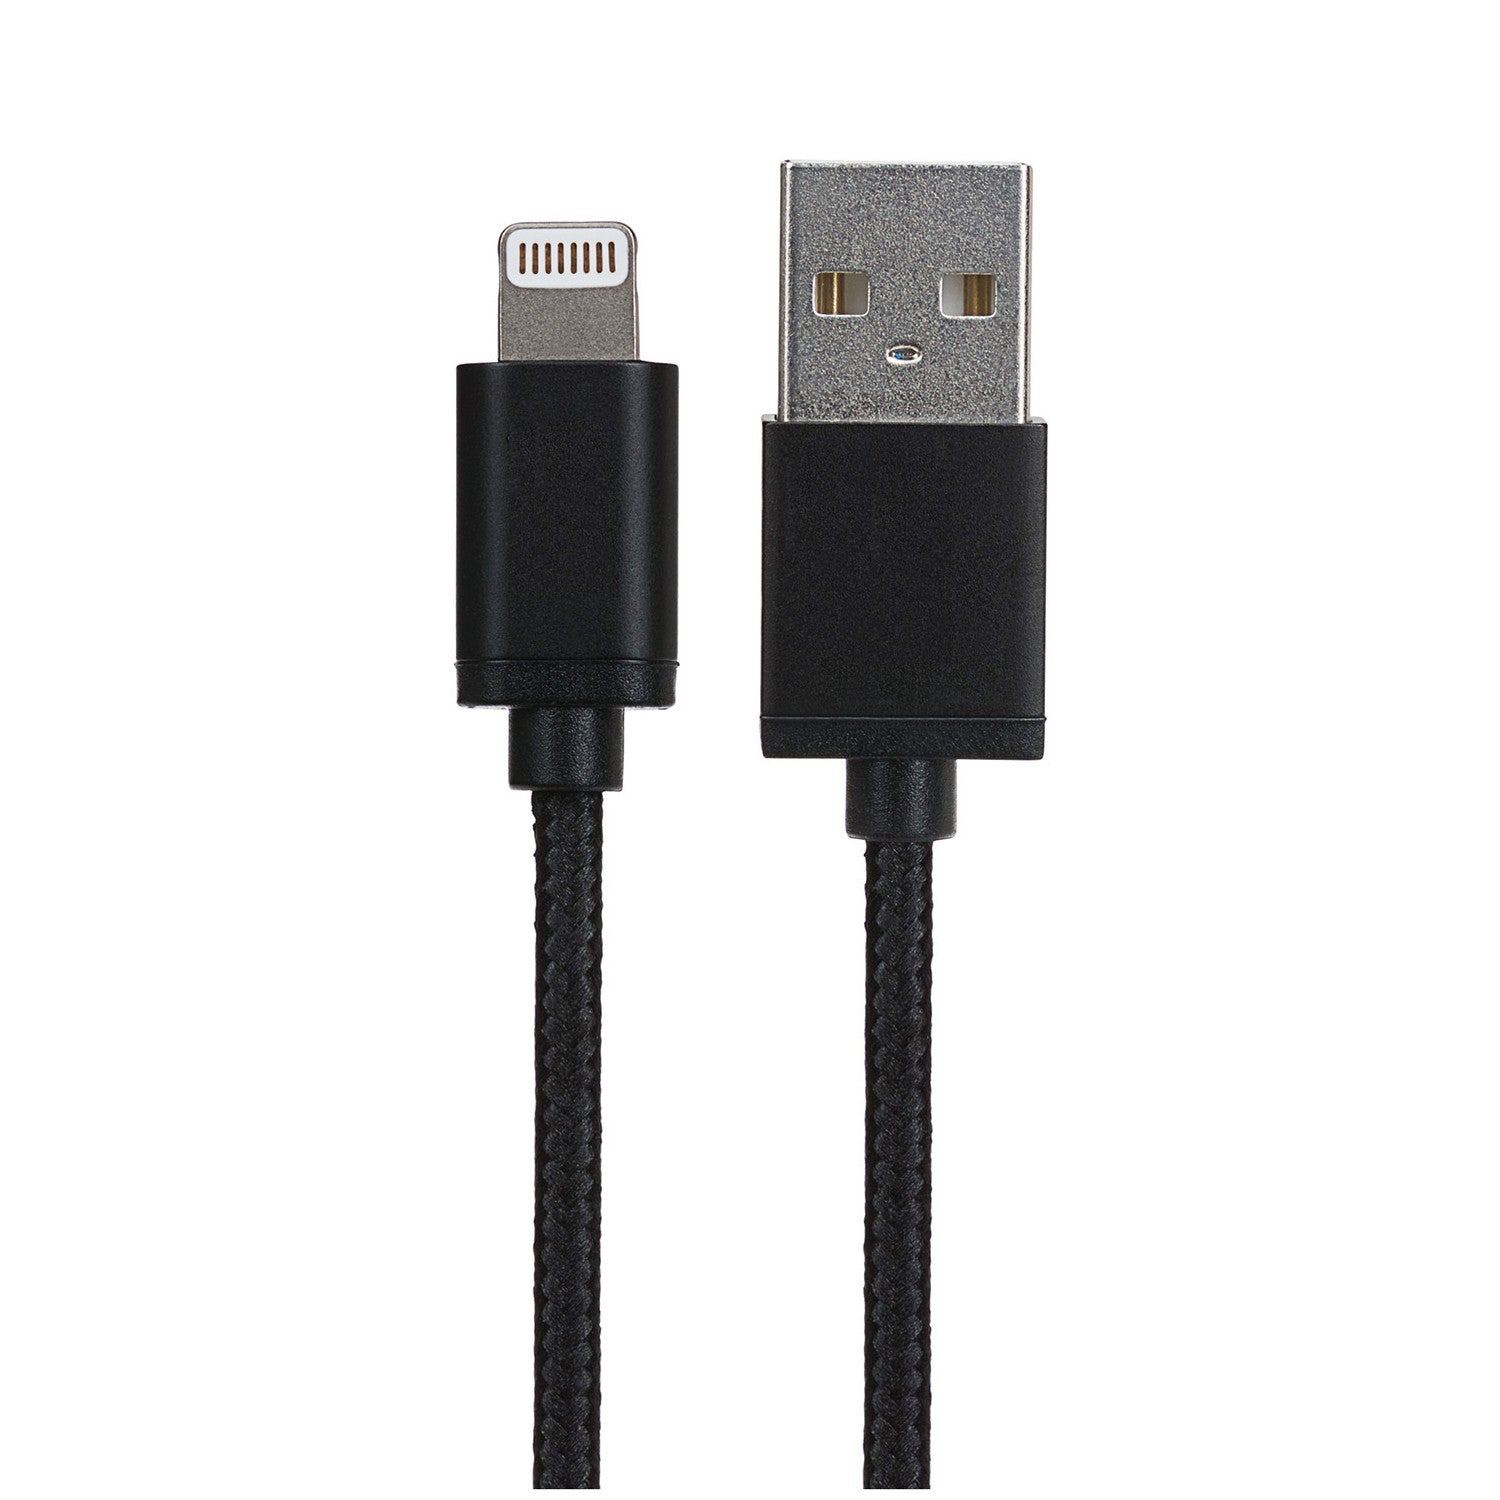 Maplin Lightning to USB-A Cable - Black, 1m